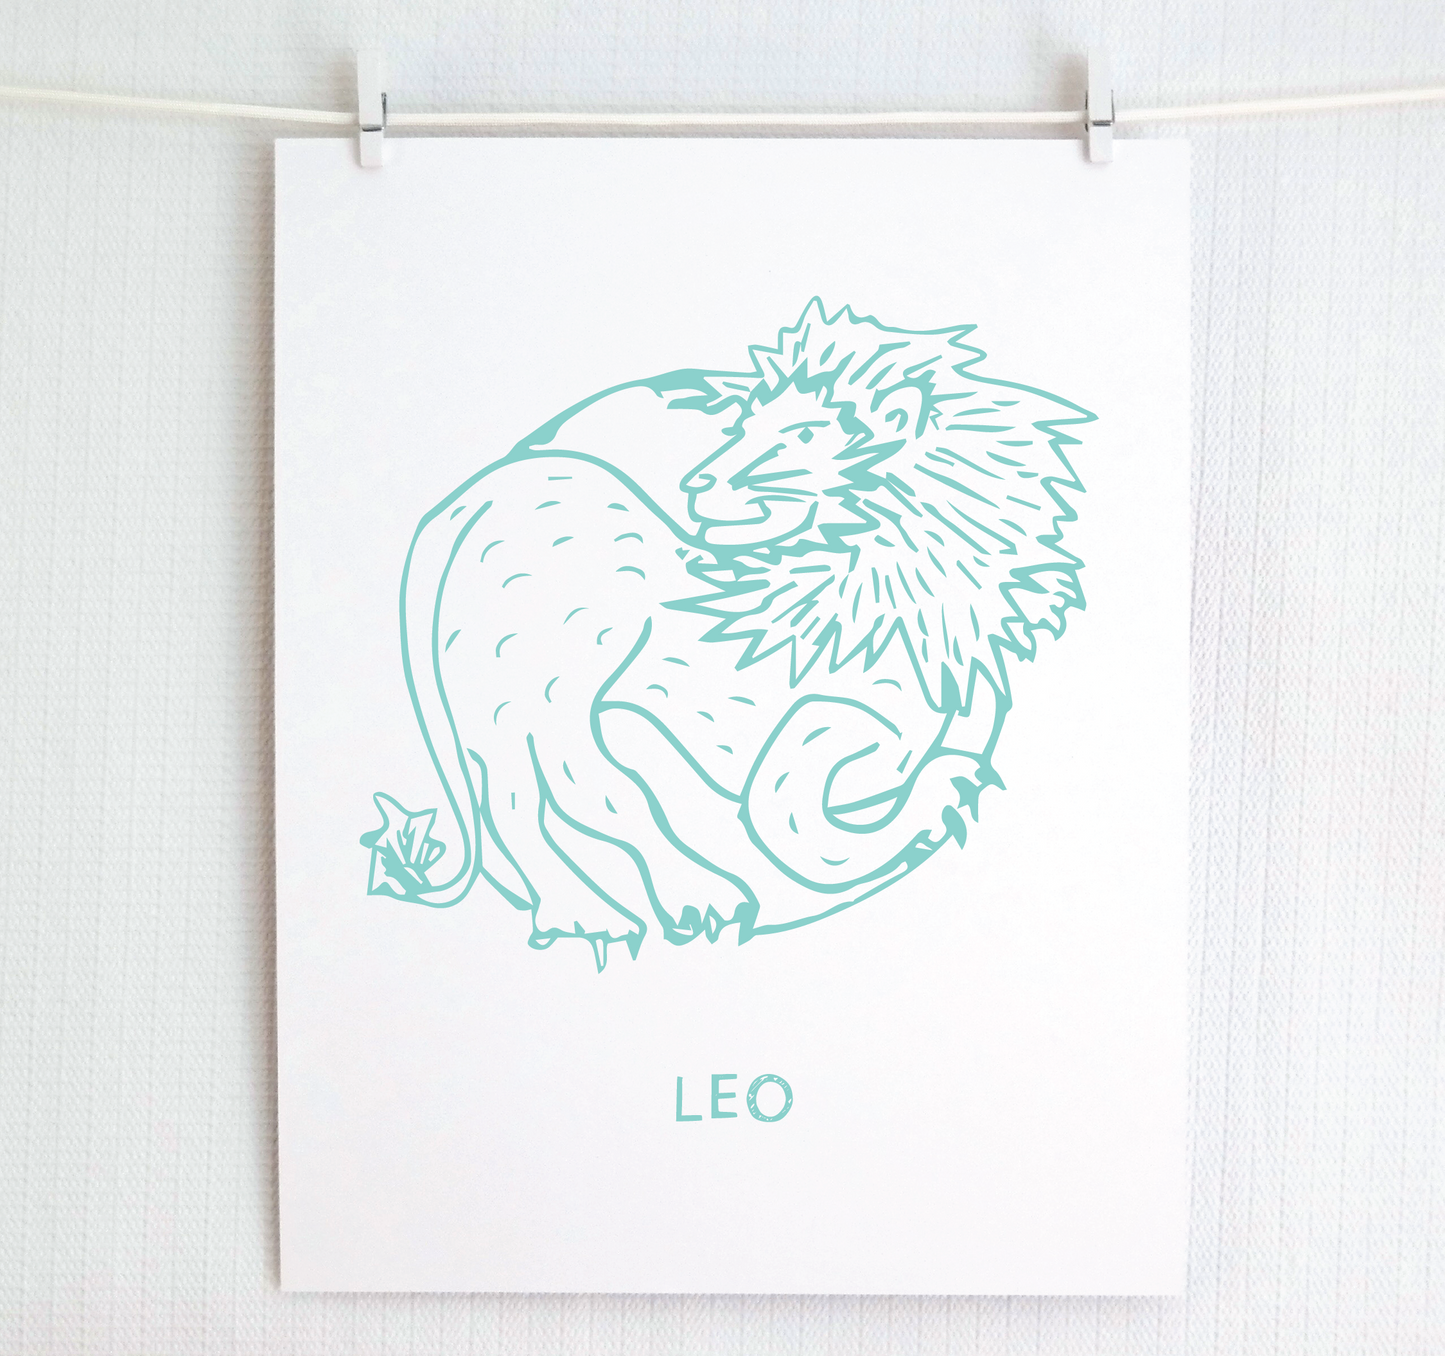 Signs of the Zodiac: LEO